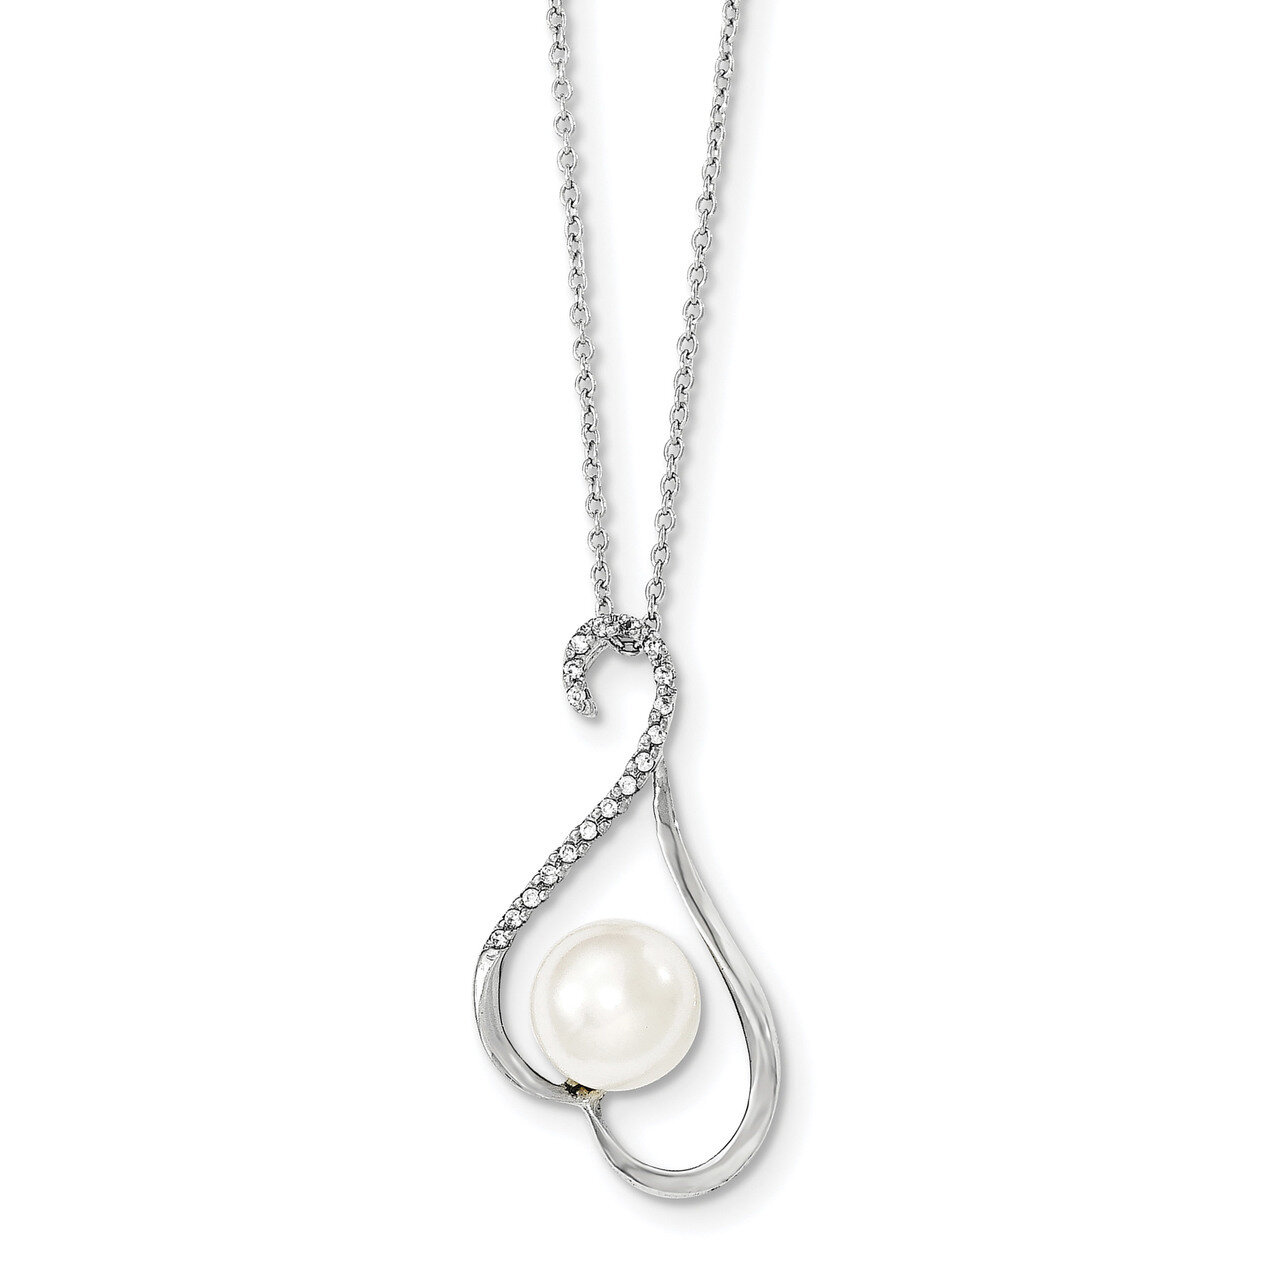 9-10mm White Cultured Freshwater Pearl CZ Diamond Chain Slide Necklace 17 Inch Sterling Silver Rhodium QP4634